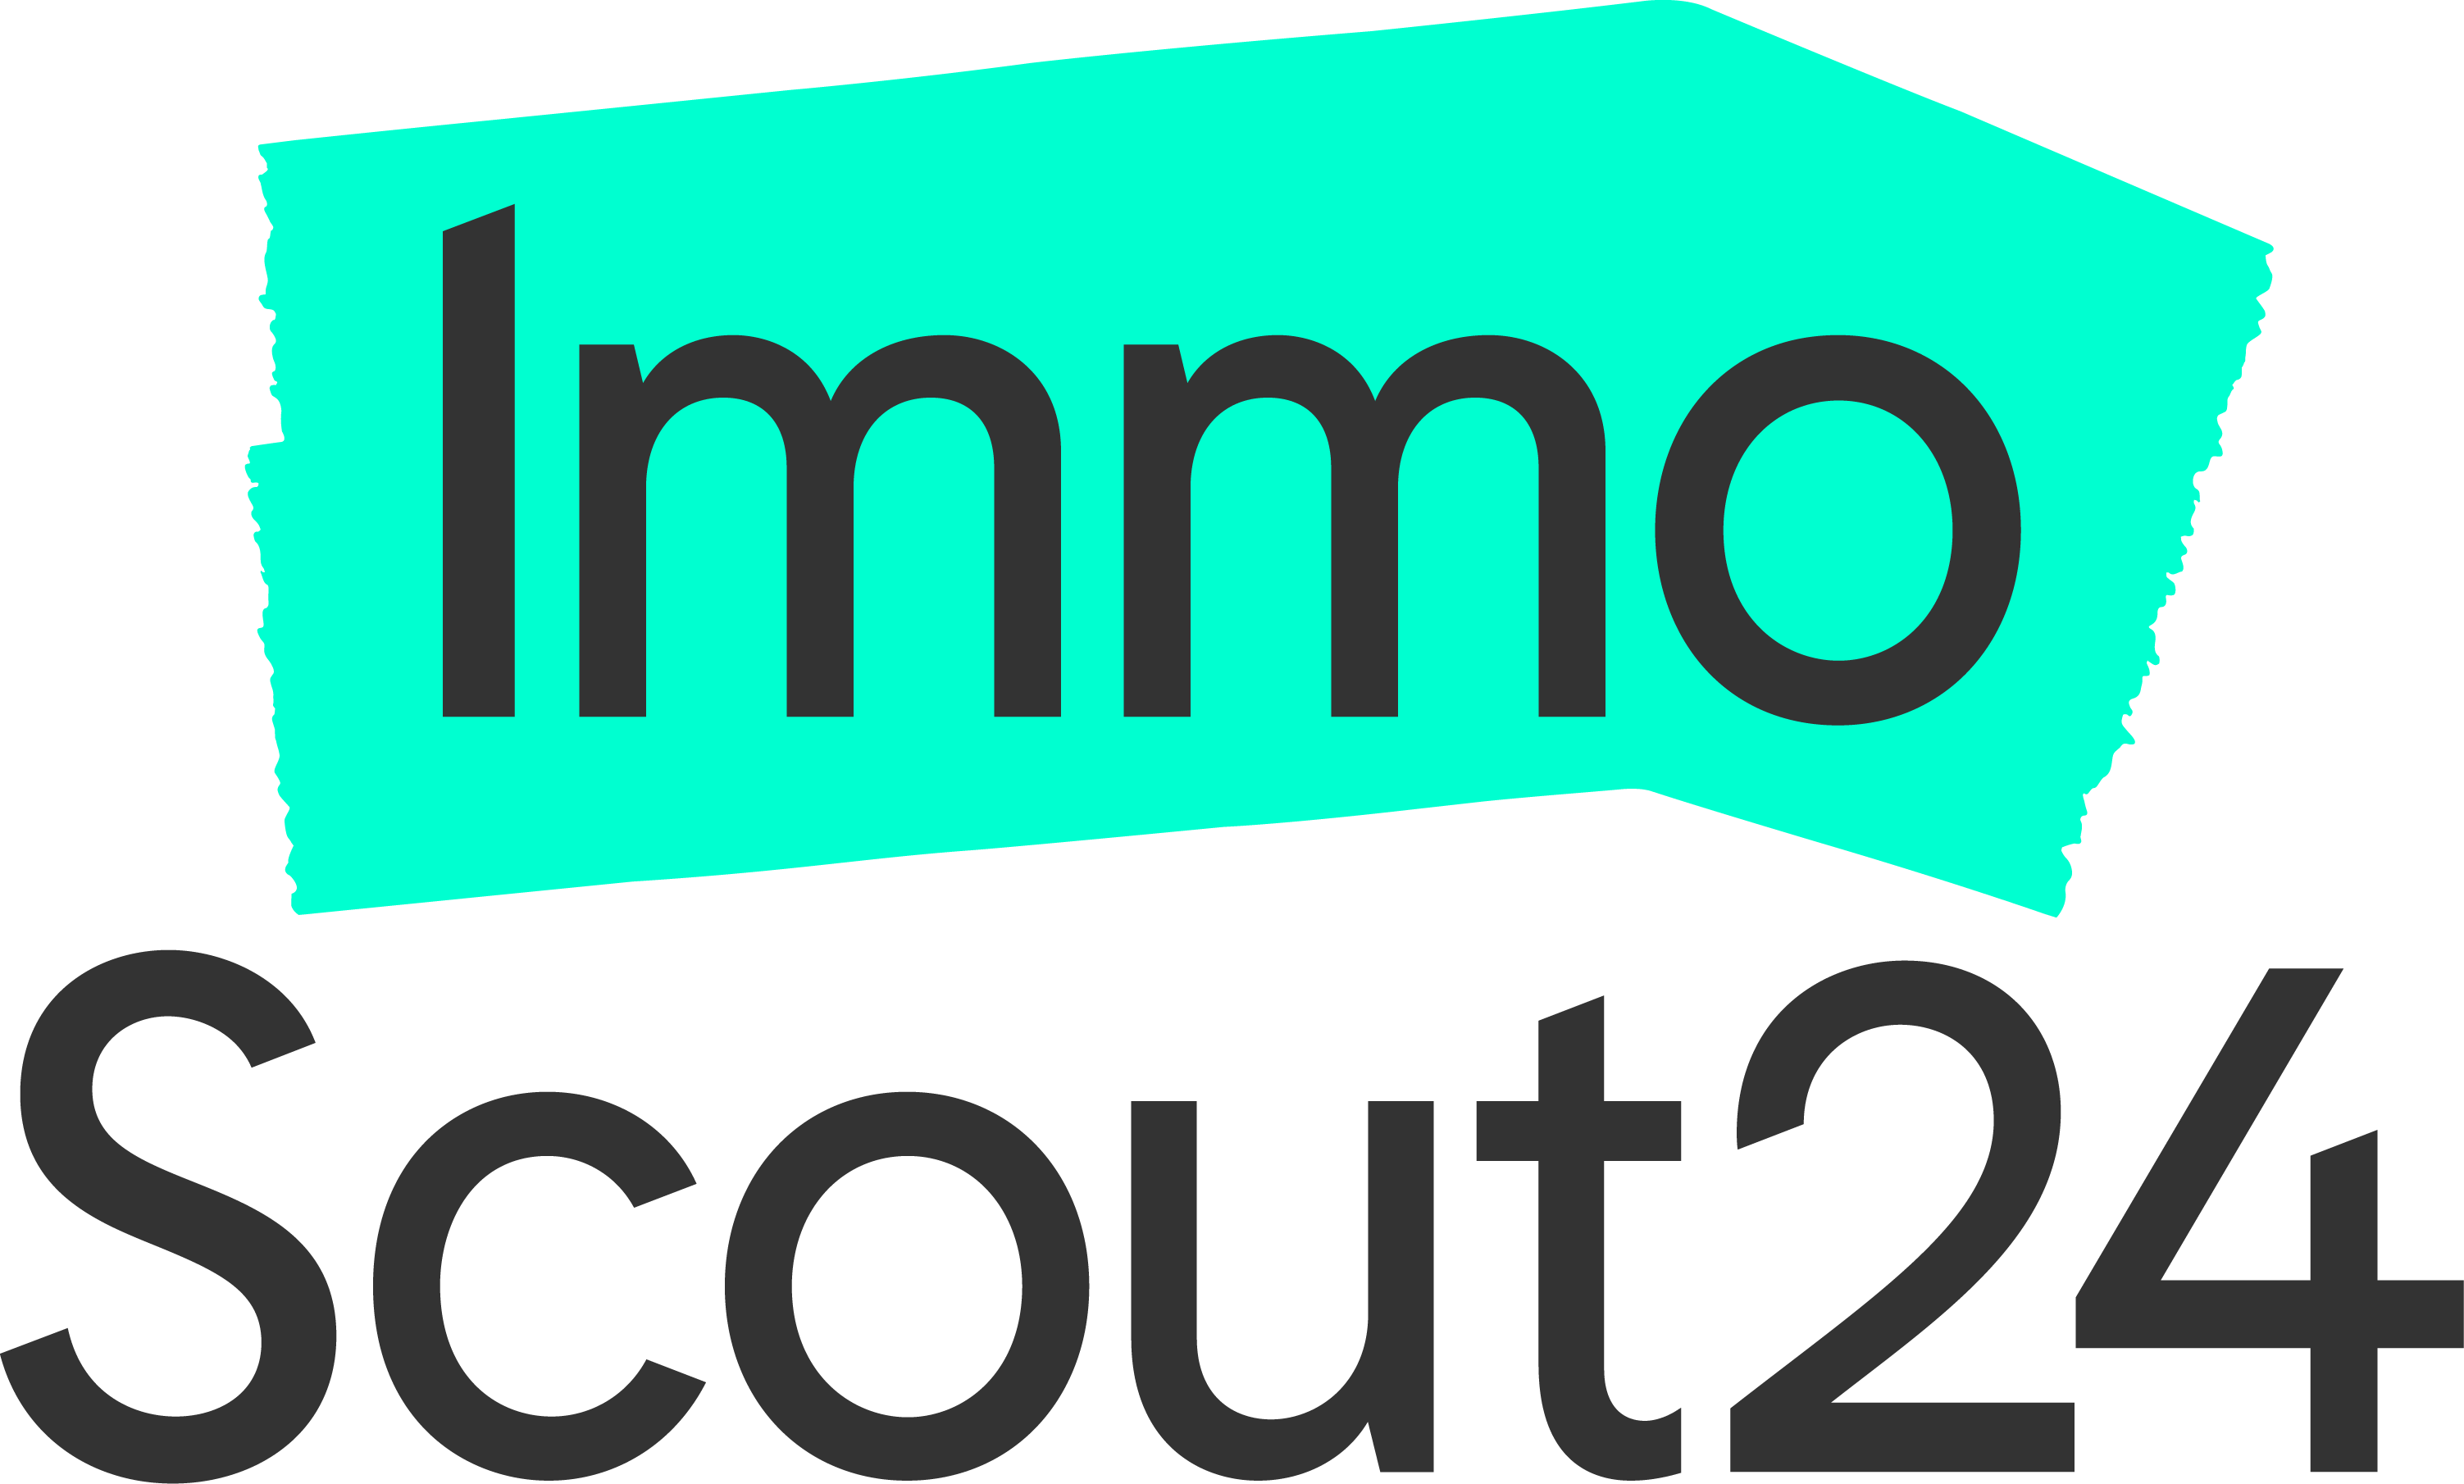 ImmoScout24_Logo